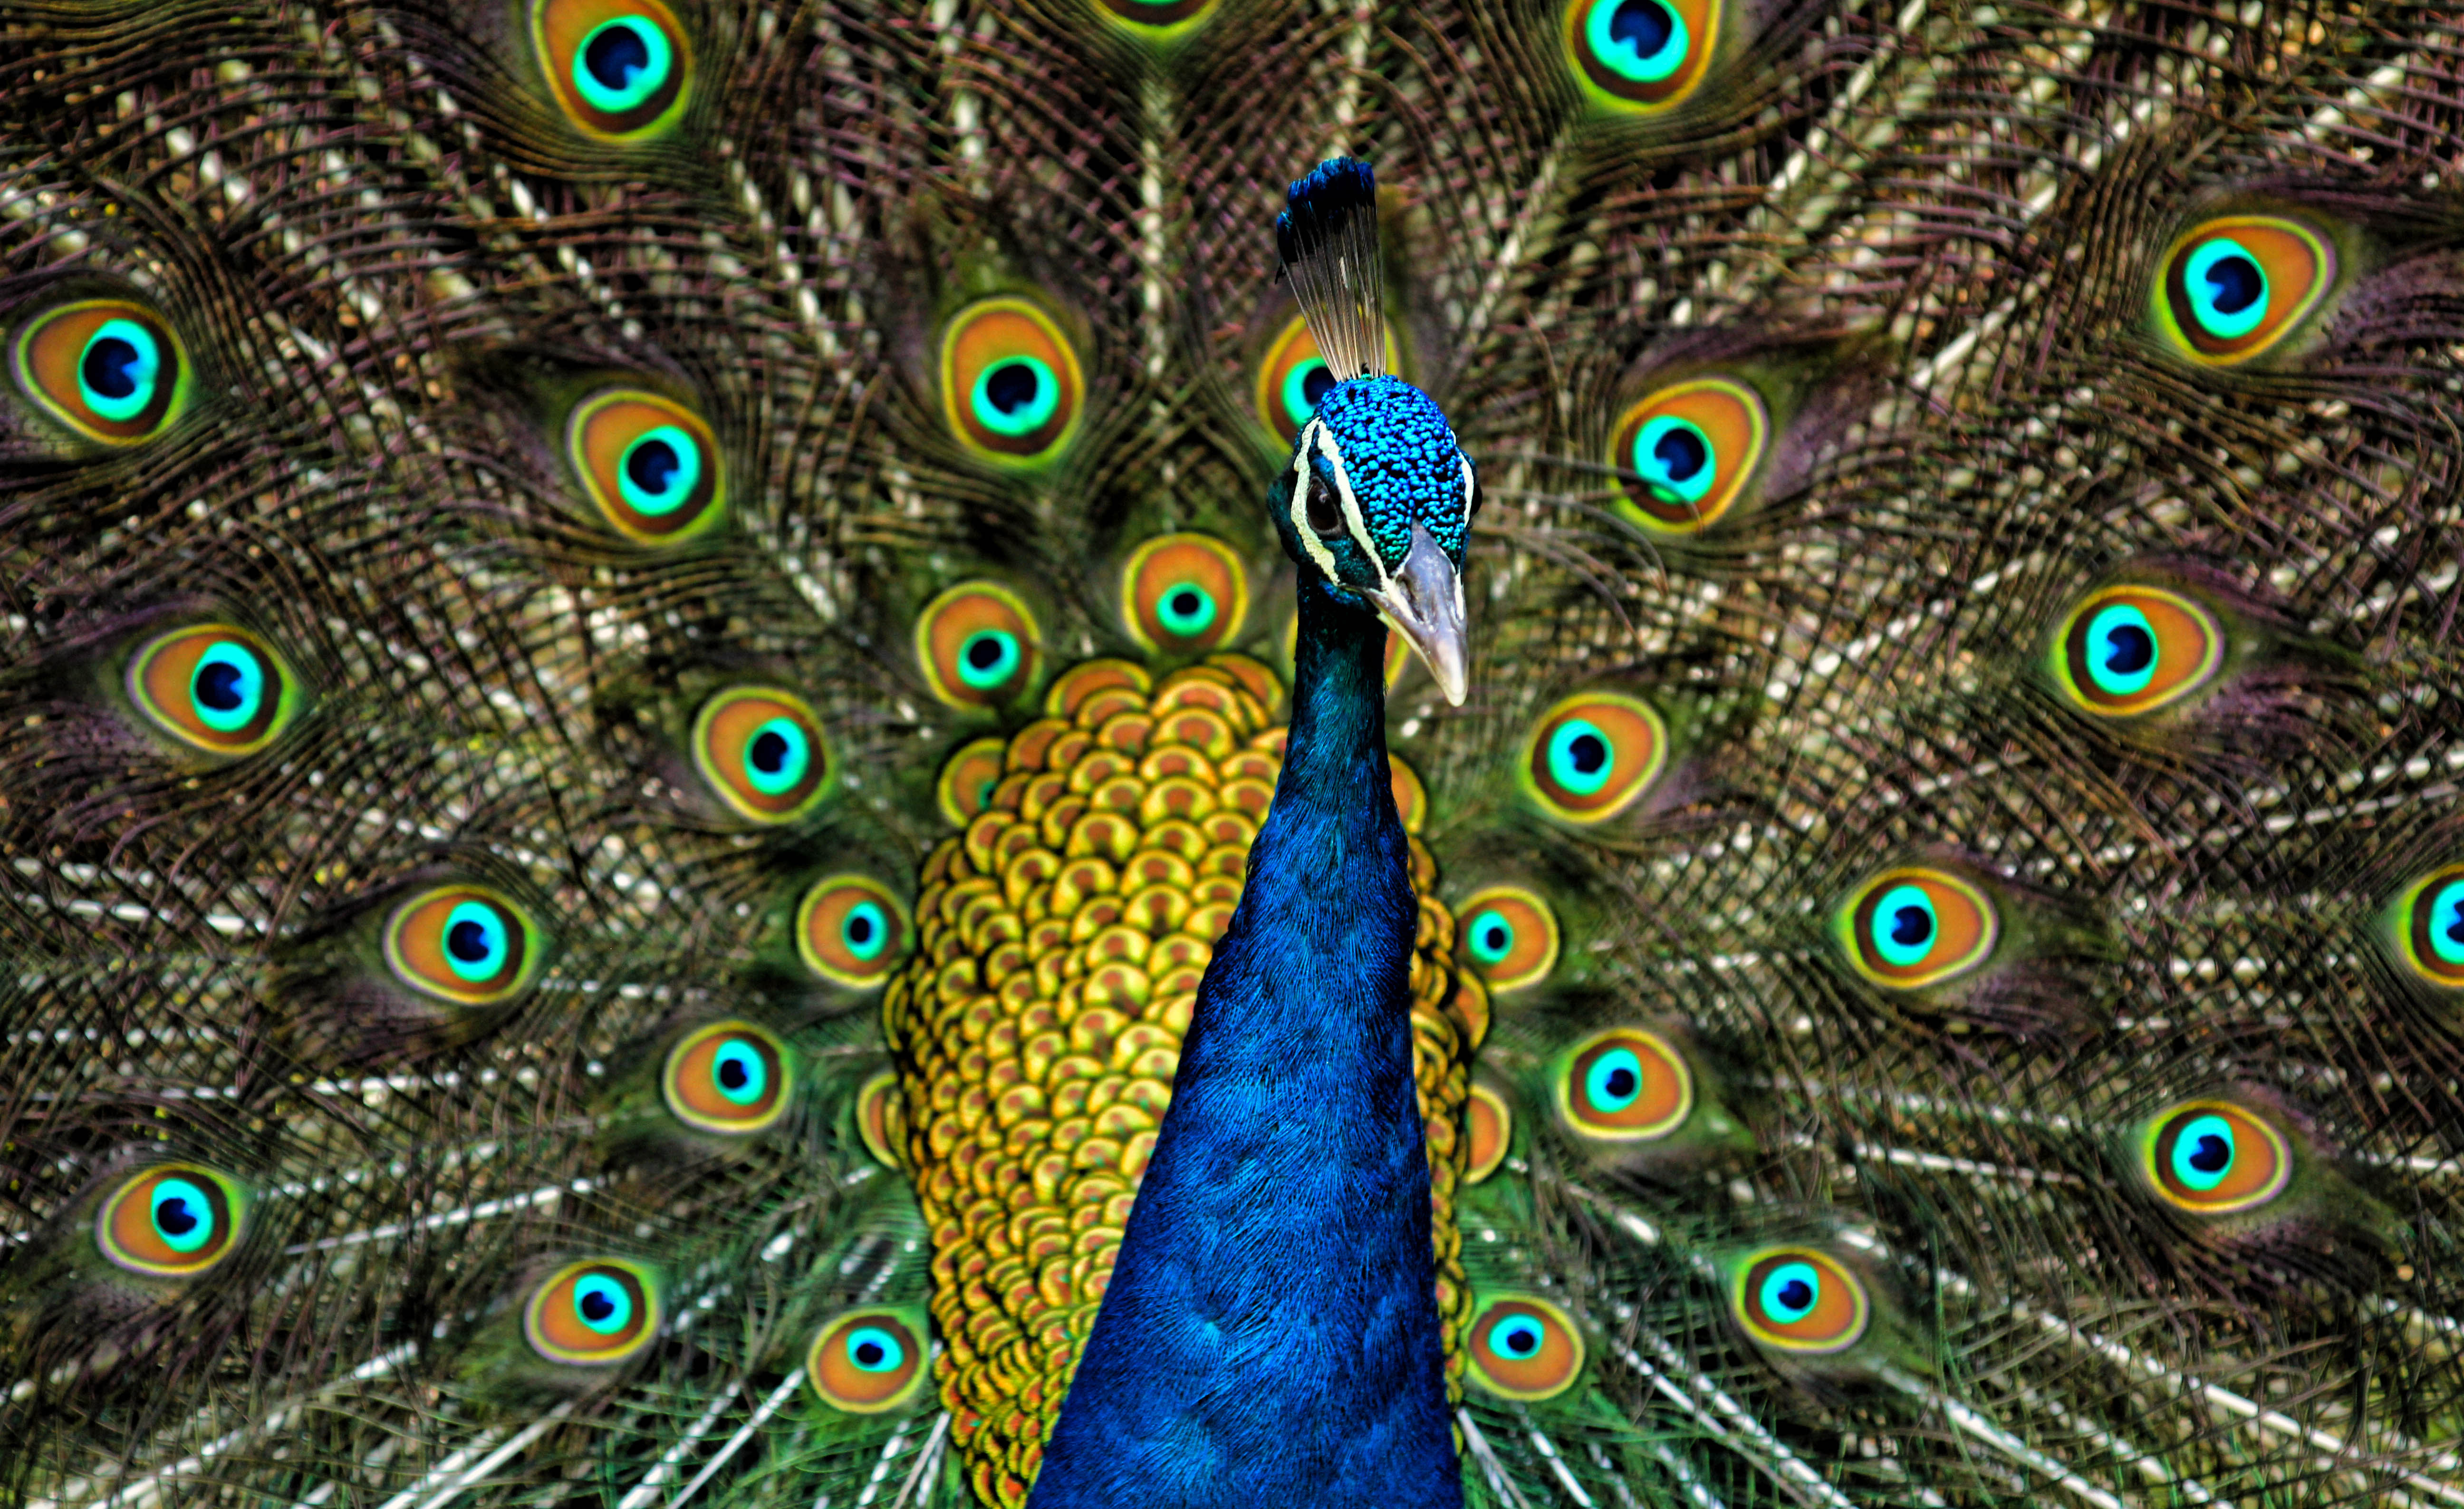 500px Photo ID: 152259915 - A peacock showing off its colours